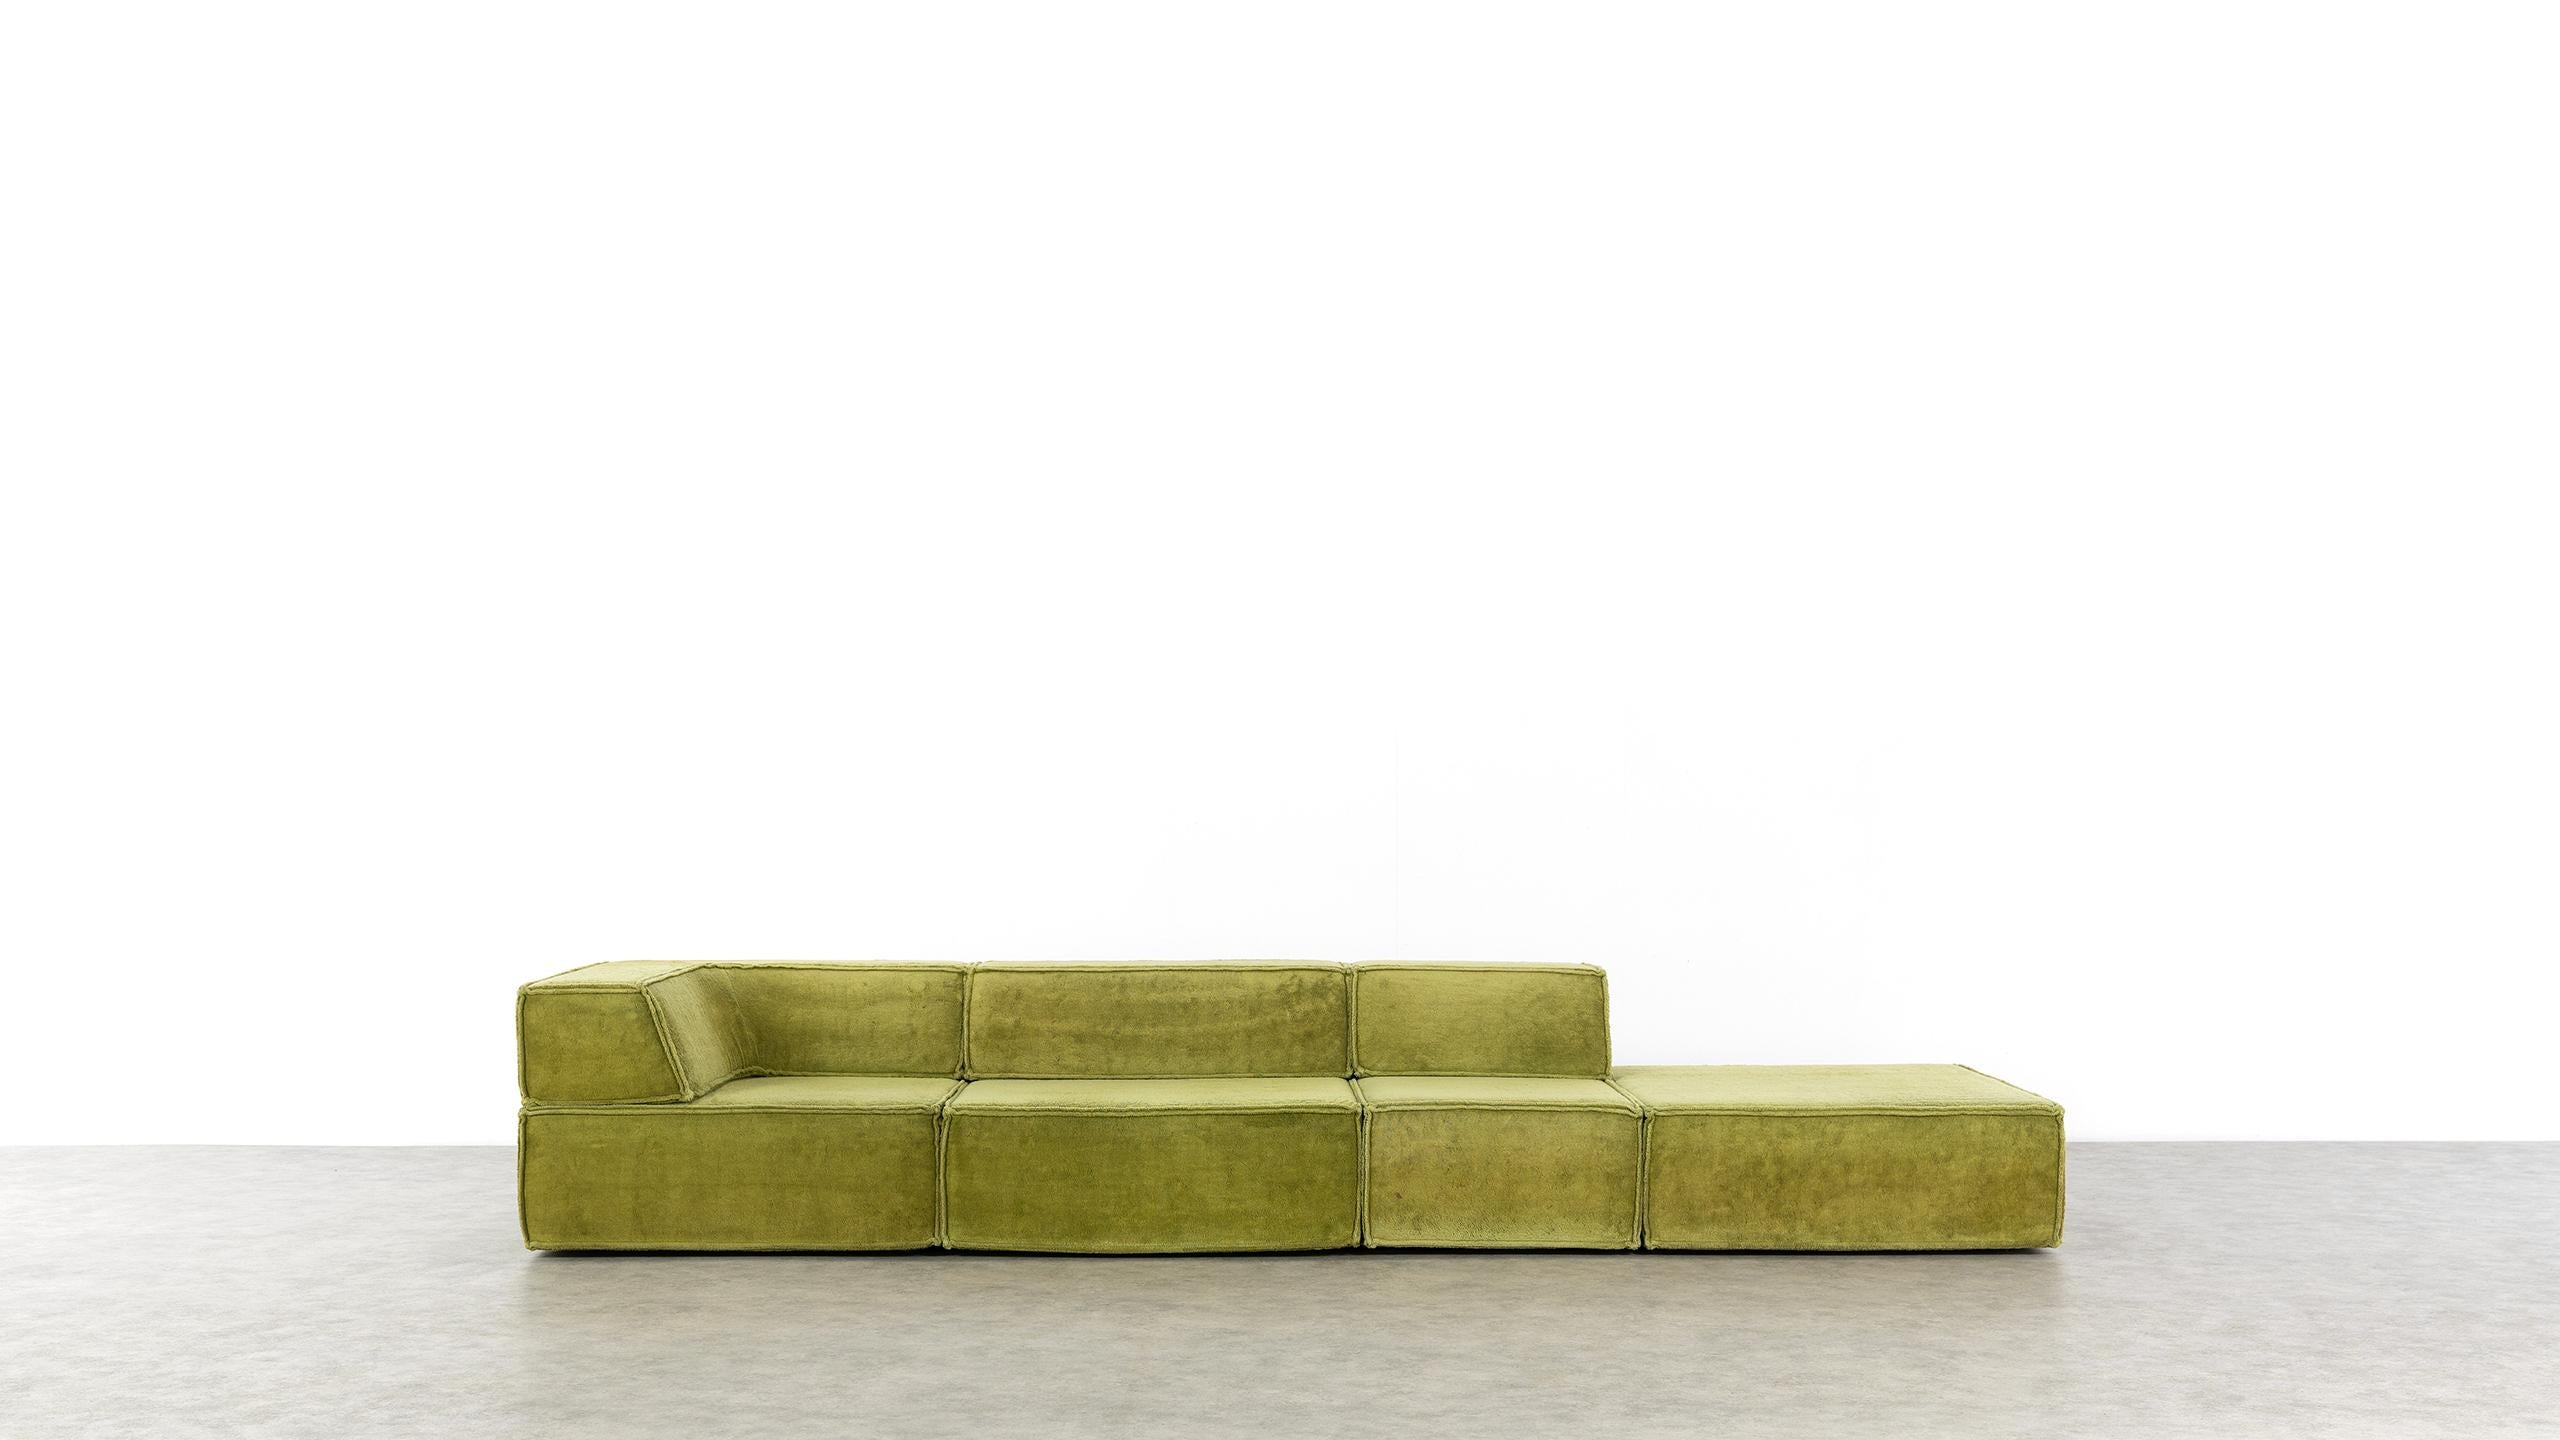 COR Trio Modular Sofa, Giant Landscape in Green, 1972 by Team Form Ag, Swiss 13